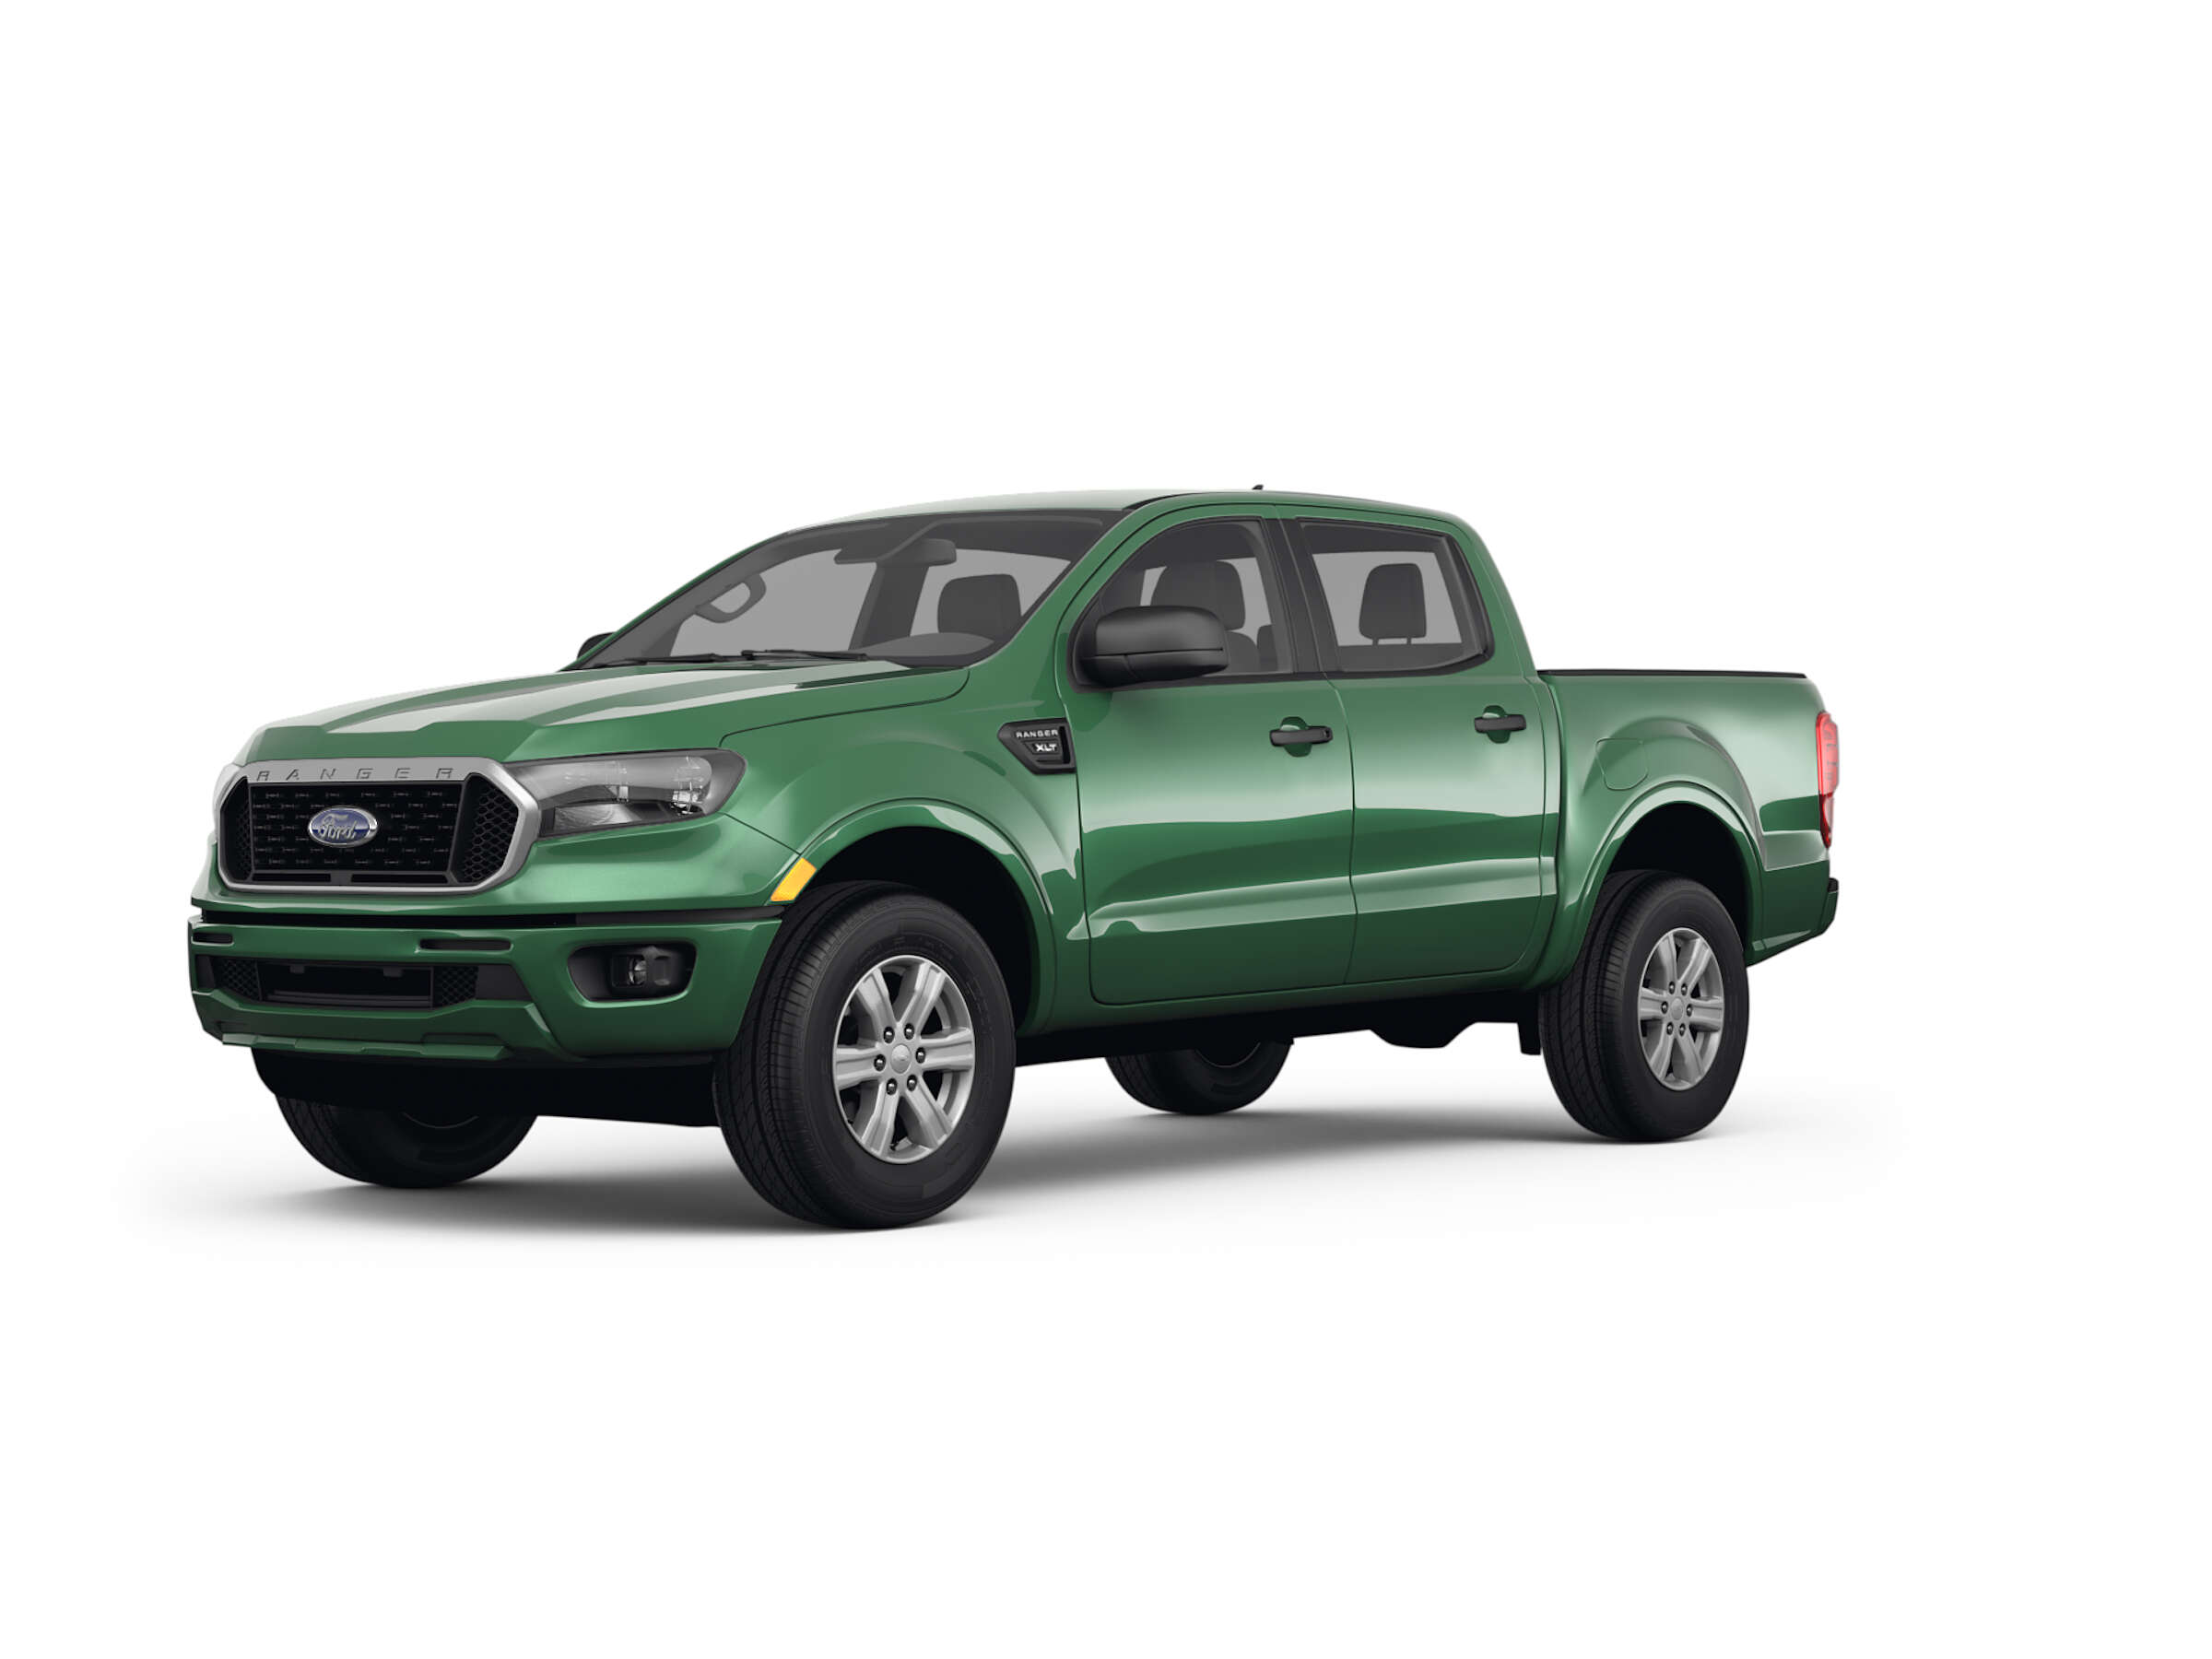 Ford Ranger for sale in Murfreesboro, Tennessee